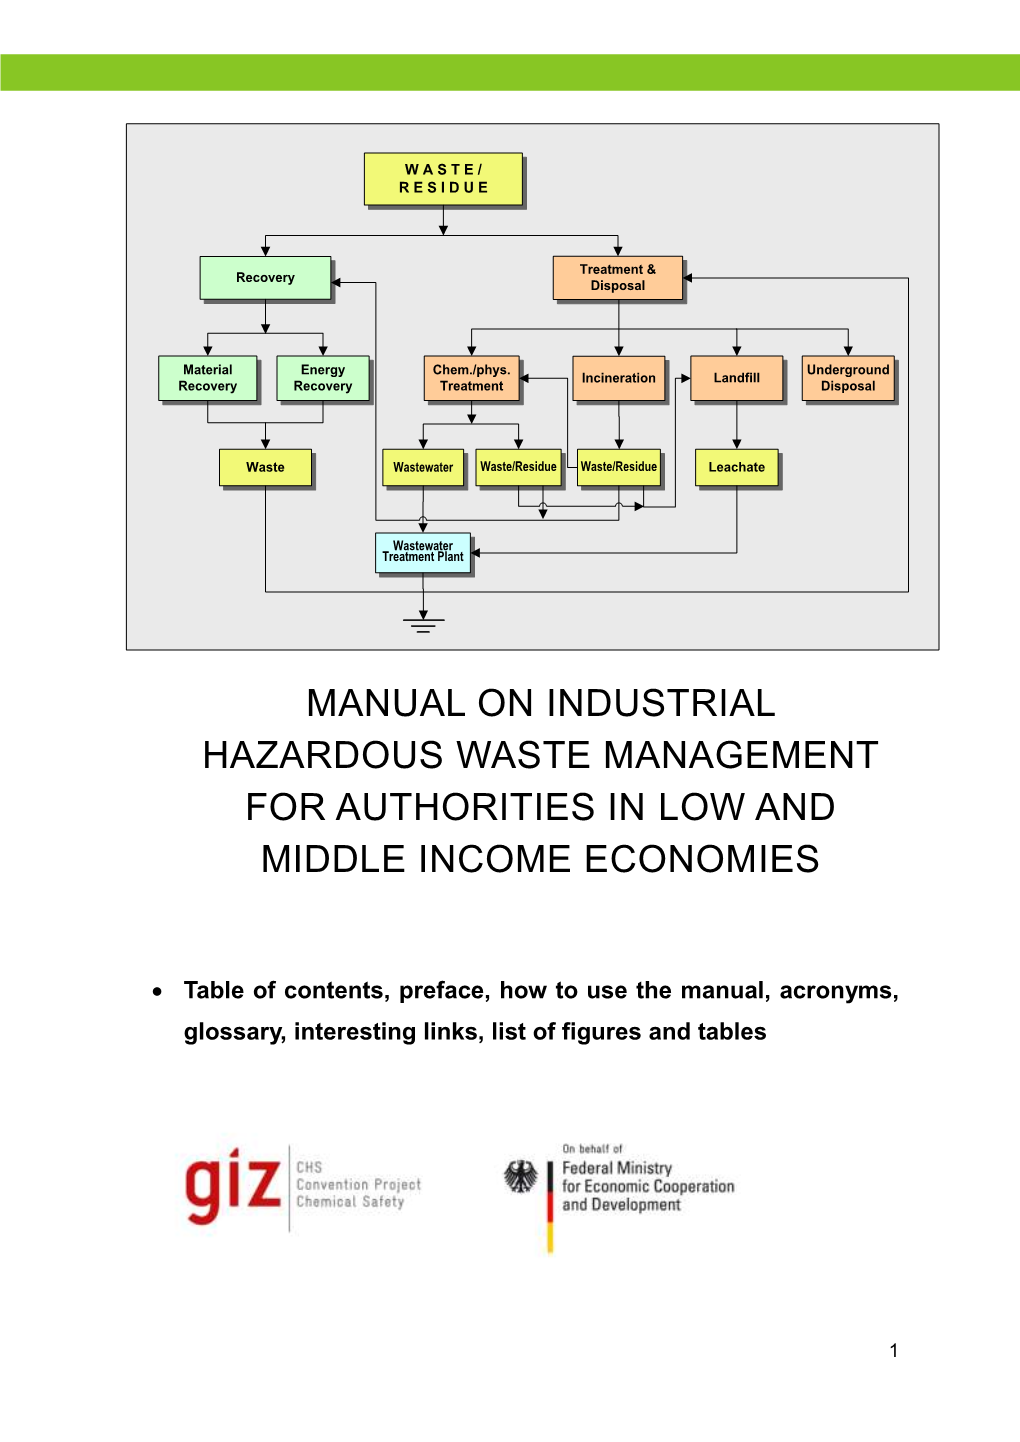 Manual on Industrial Hazardous Waste Management for Authorities in Low and Middle Income Economies